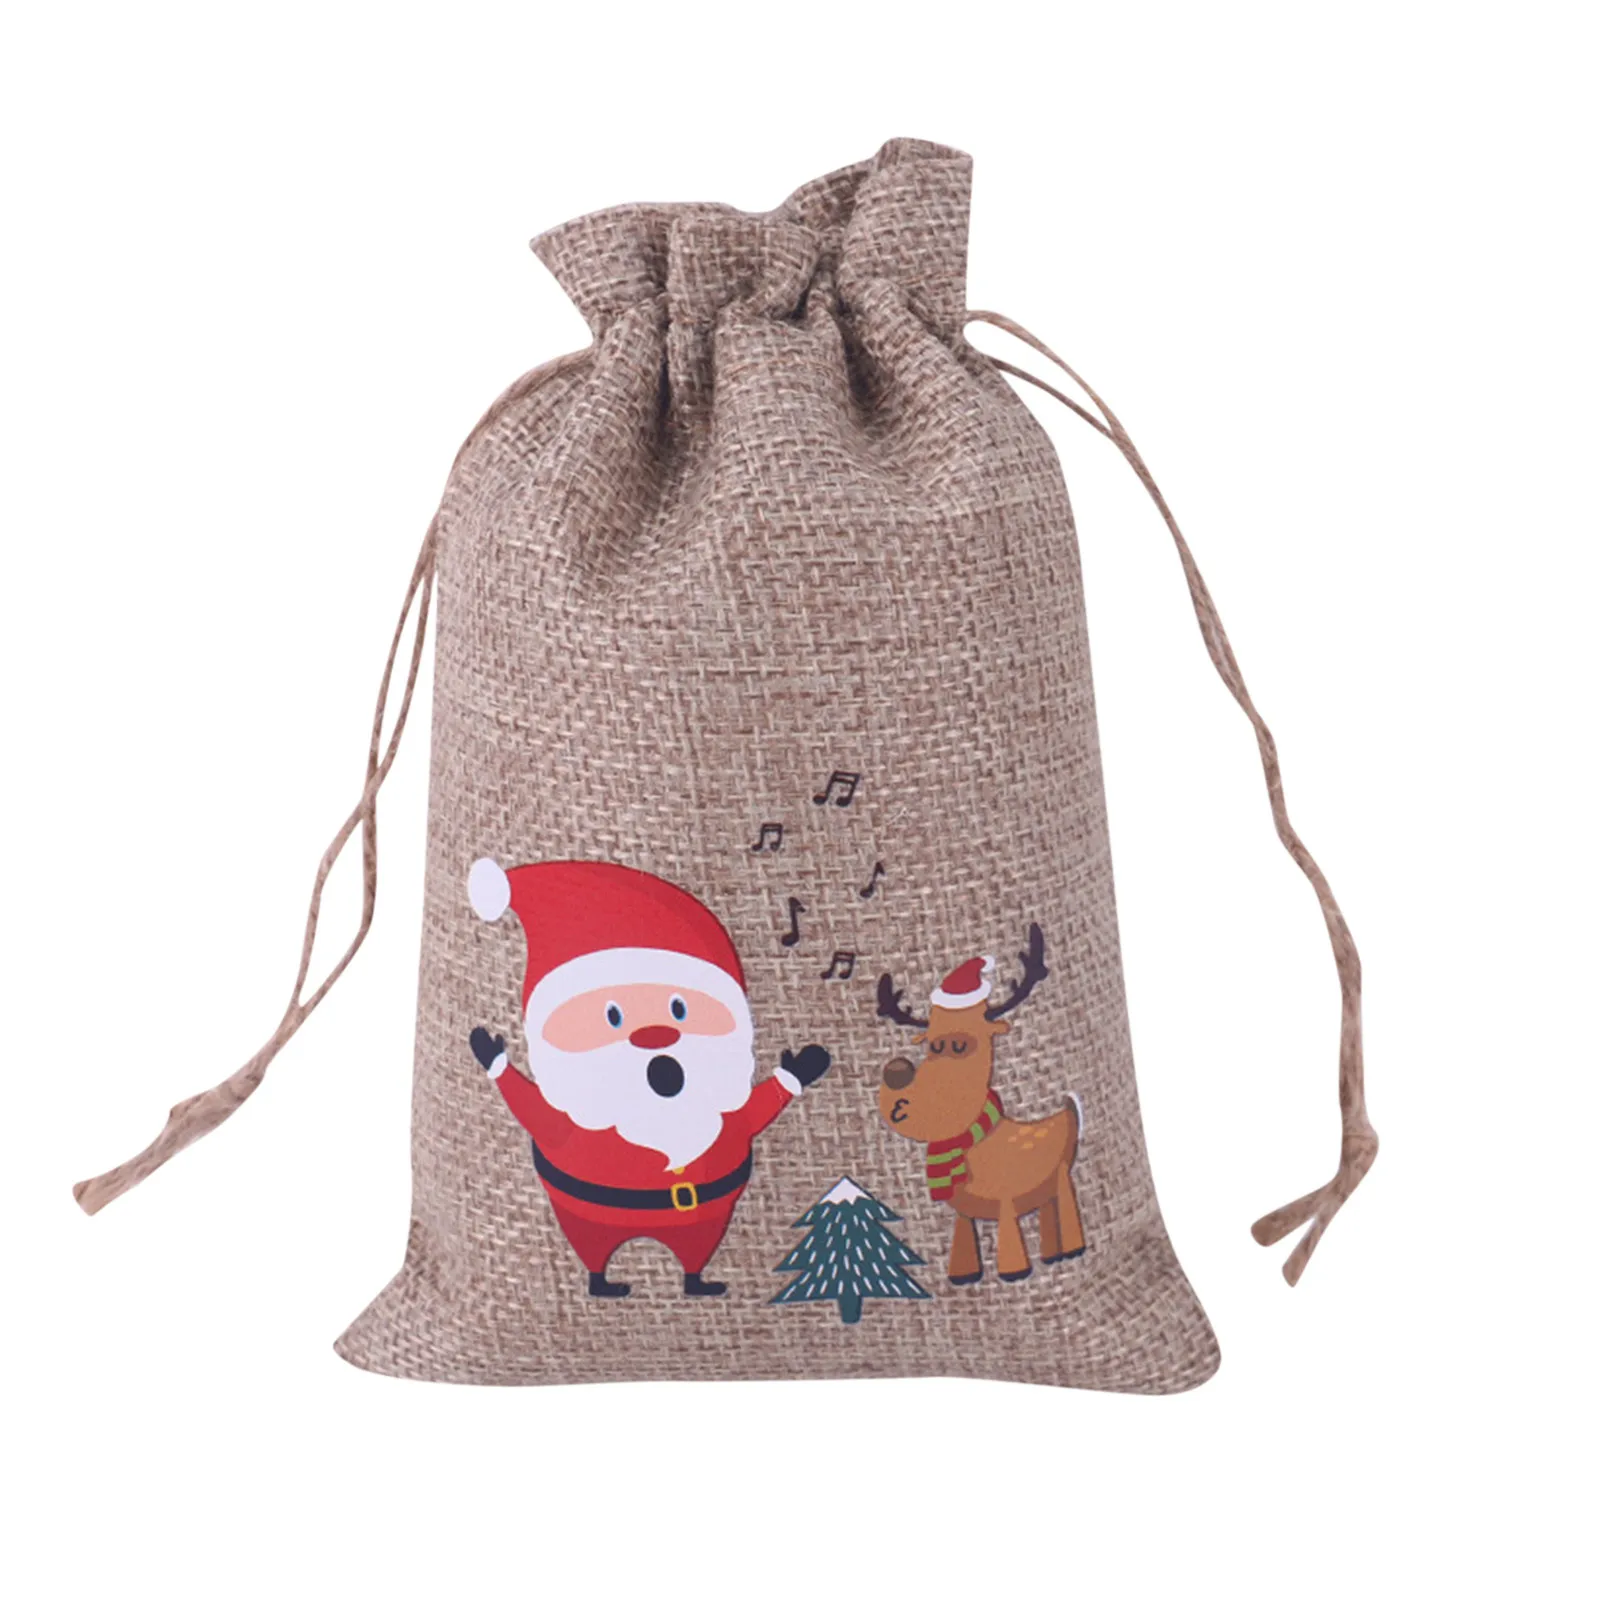 Ruisita 60 Pieces Christmas Linen Bags Burlap Christmas Bags with Drawstrings 6 x 4 Inch Small Gift Bags Bulk Jute Burlap Bags for Candy Wrapper Xmas Party Favor Supplies 